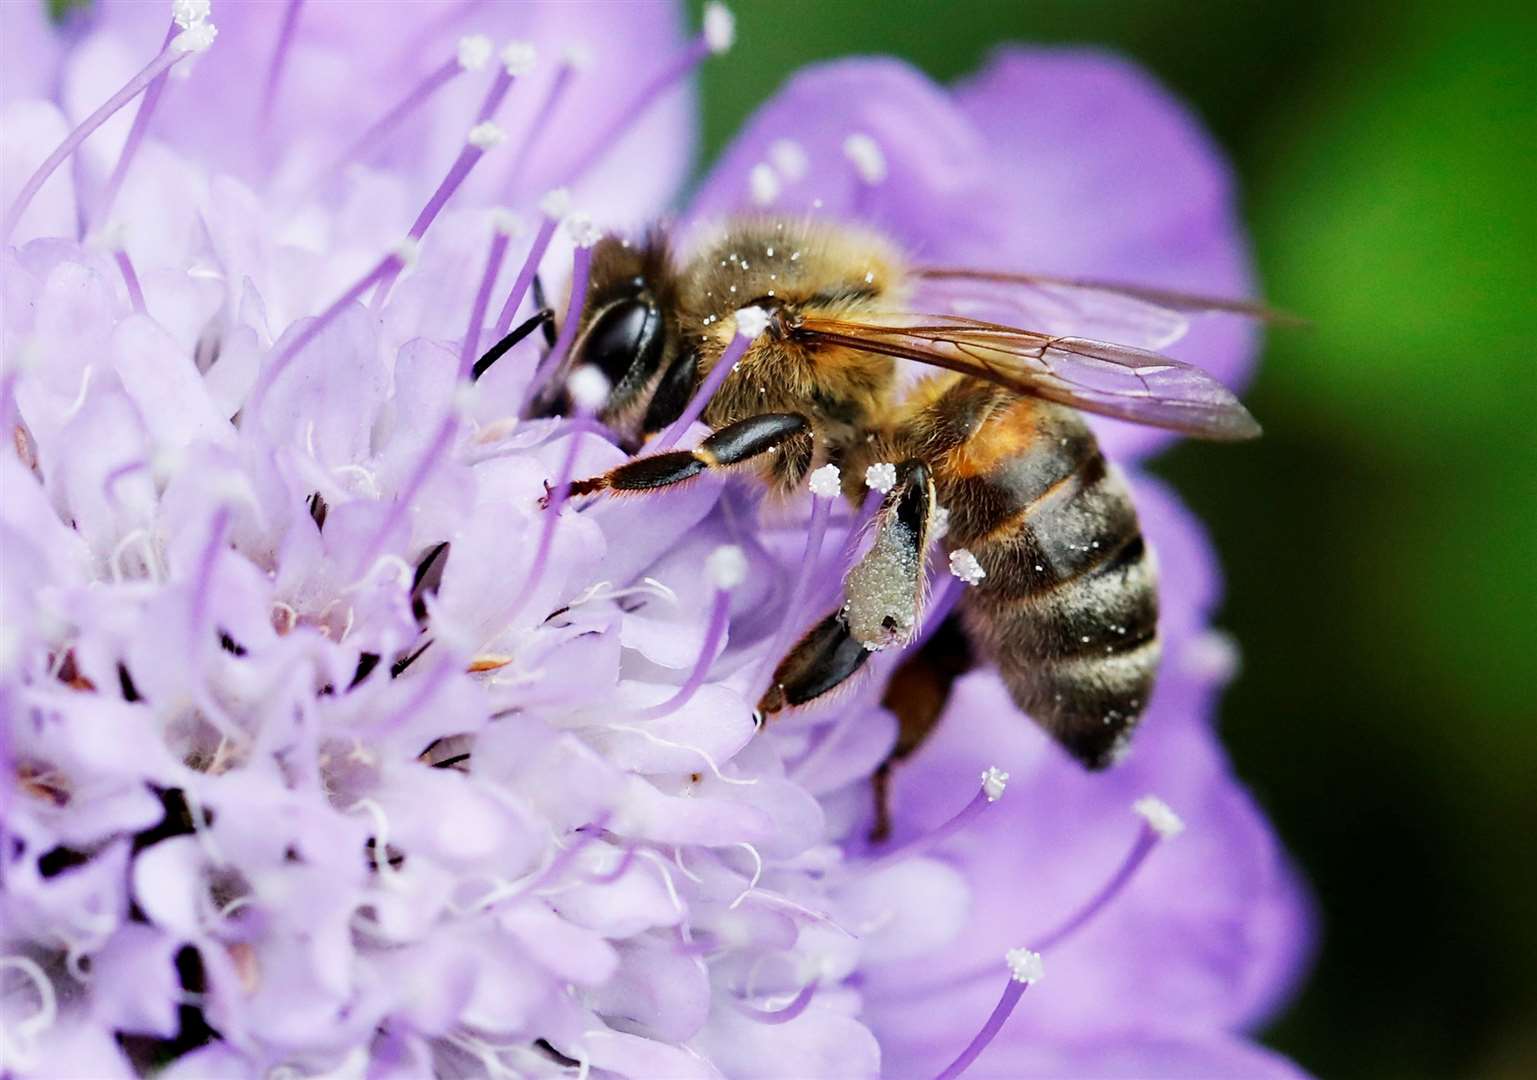 Bees are in serious decline worldwide because of climate change, habitat loss and disease. Picture: RSPCA/PA